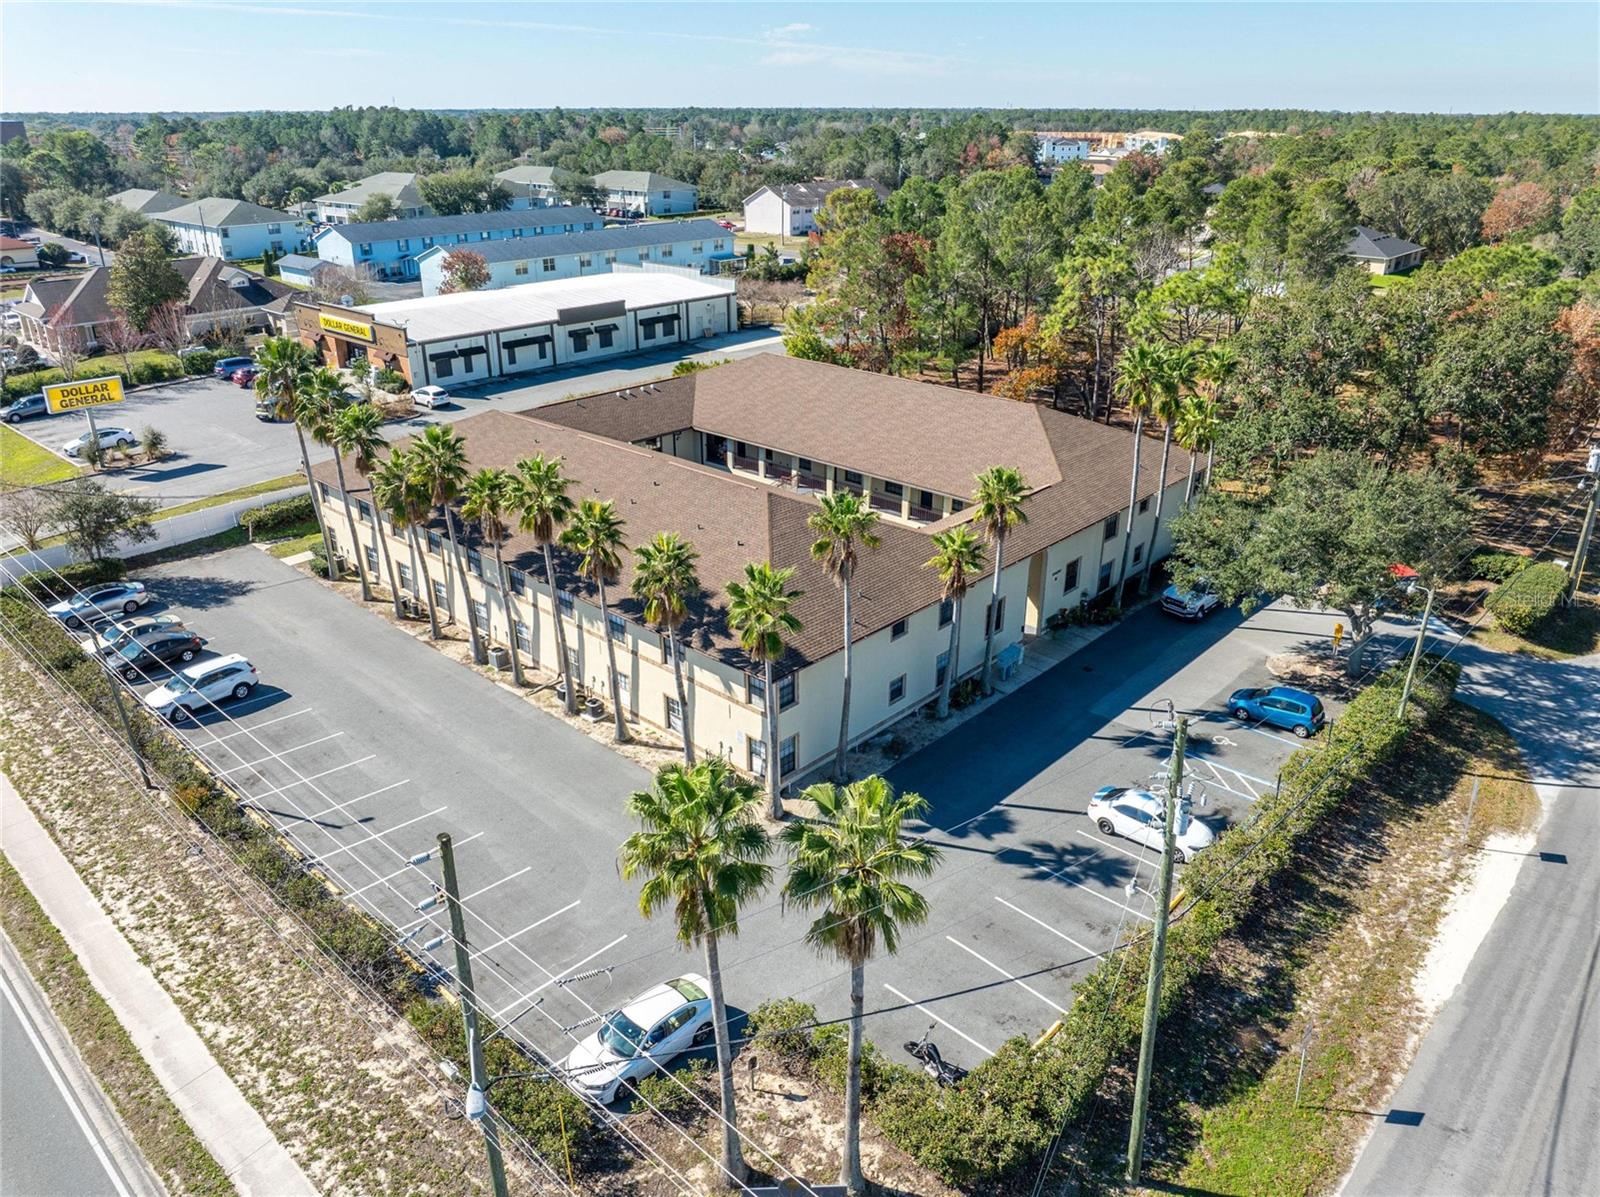 20 Apartments For Sale in Spring Hill, FL - all 2BR/2BA